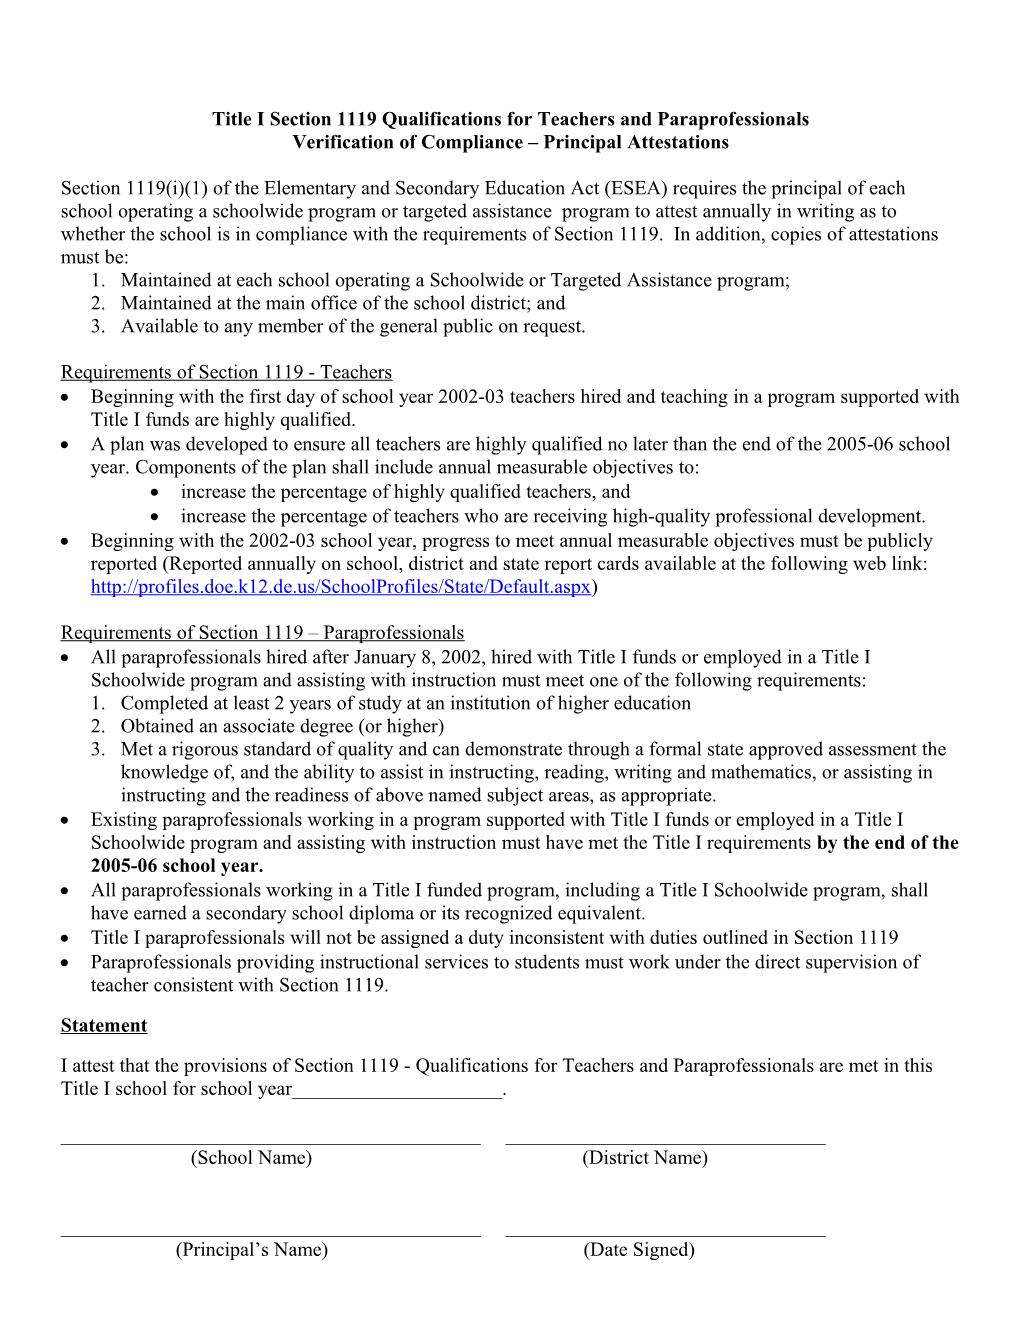 Title I Section 1119 Qualifications for Teachers and Paraprofessionals